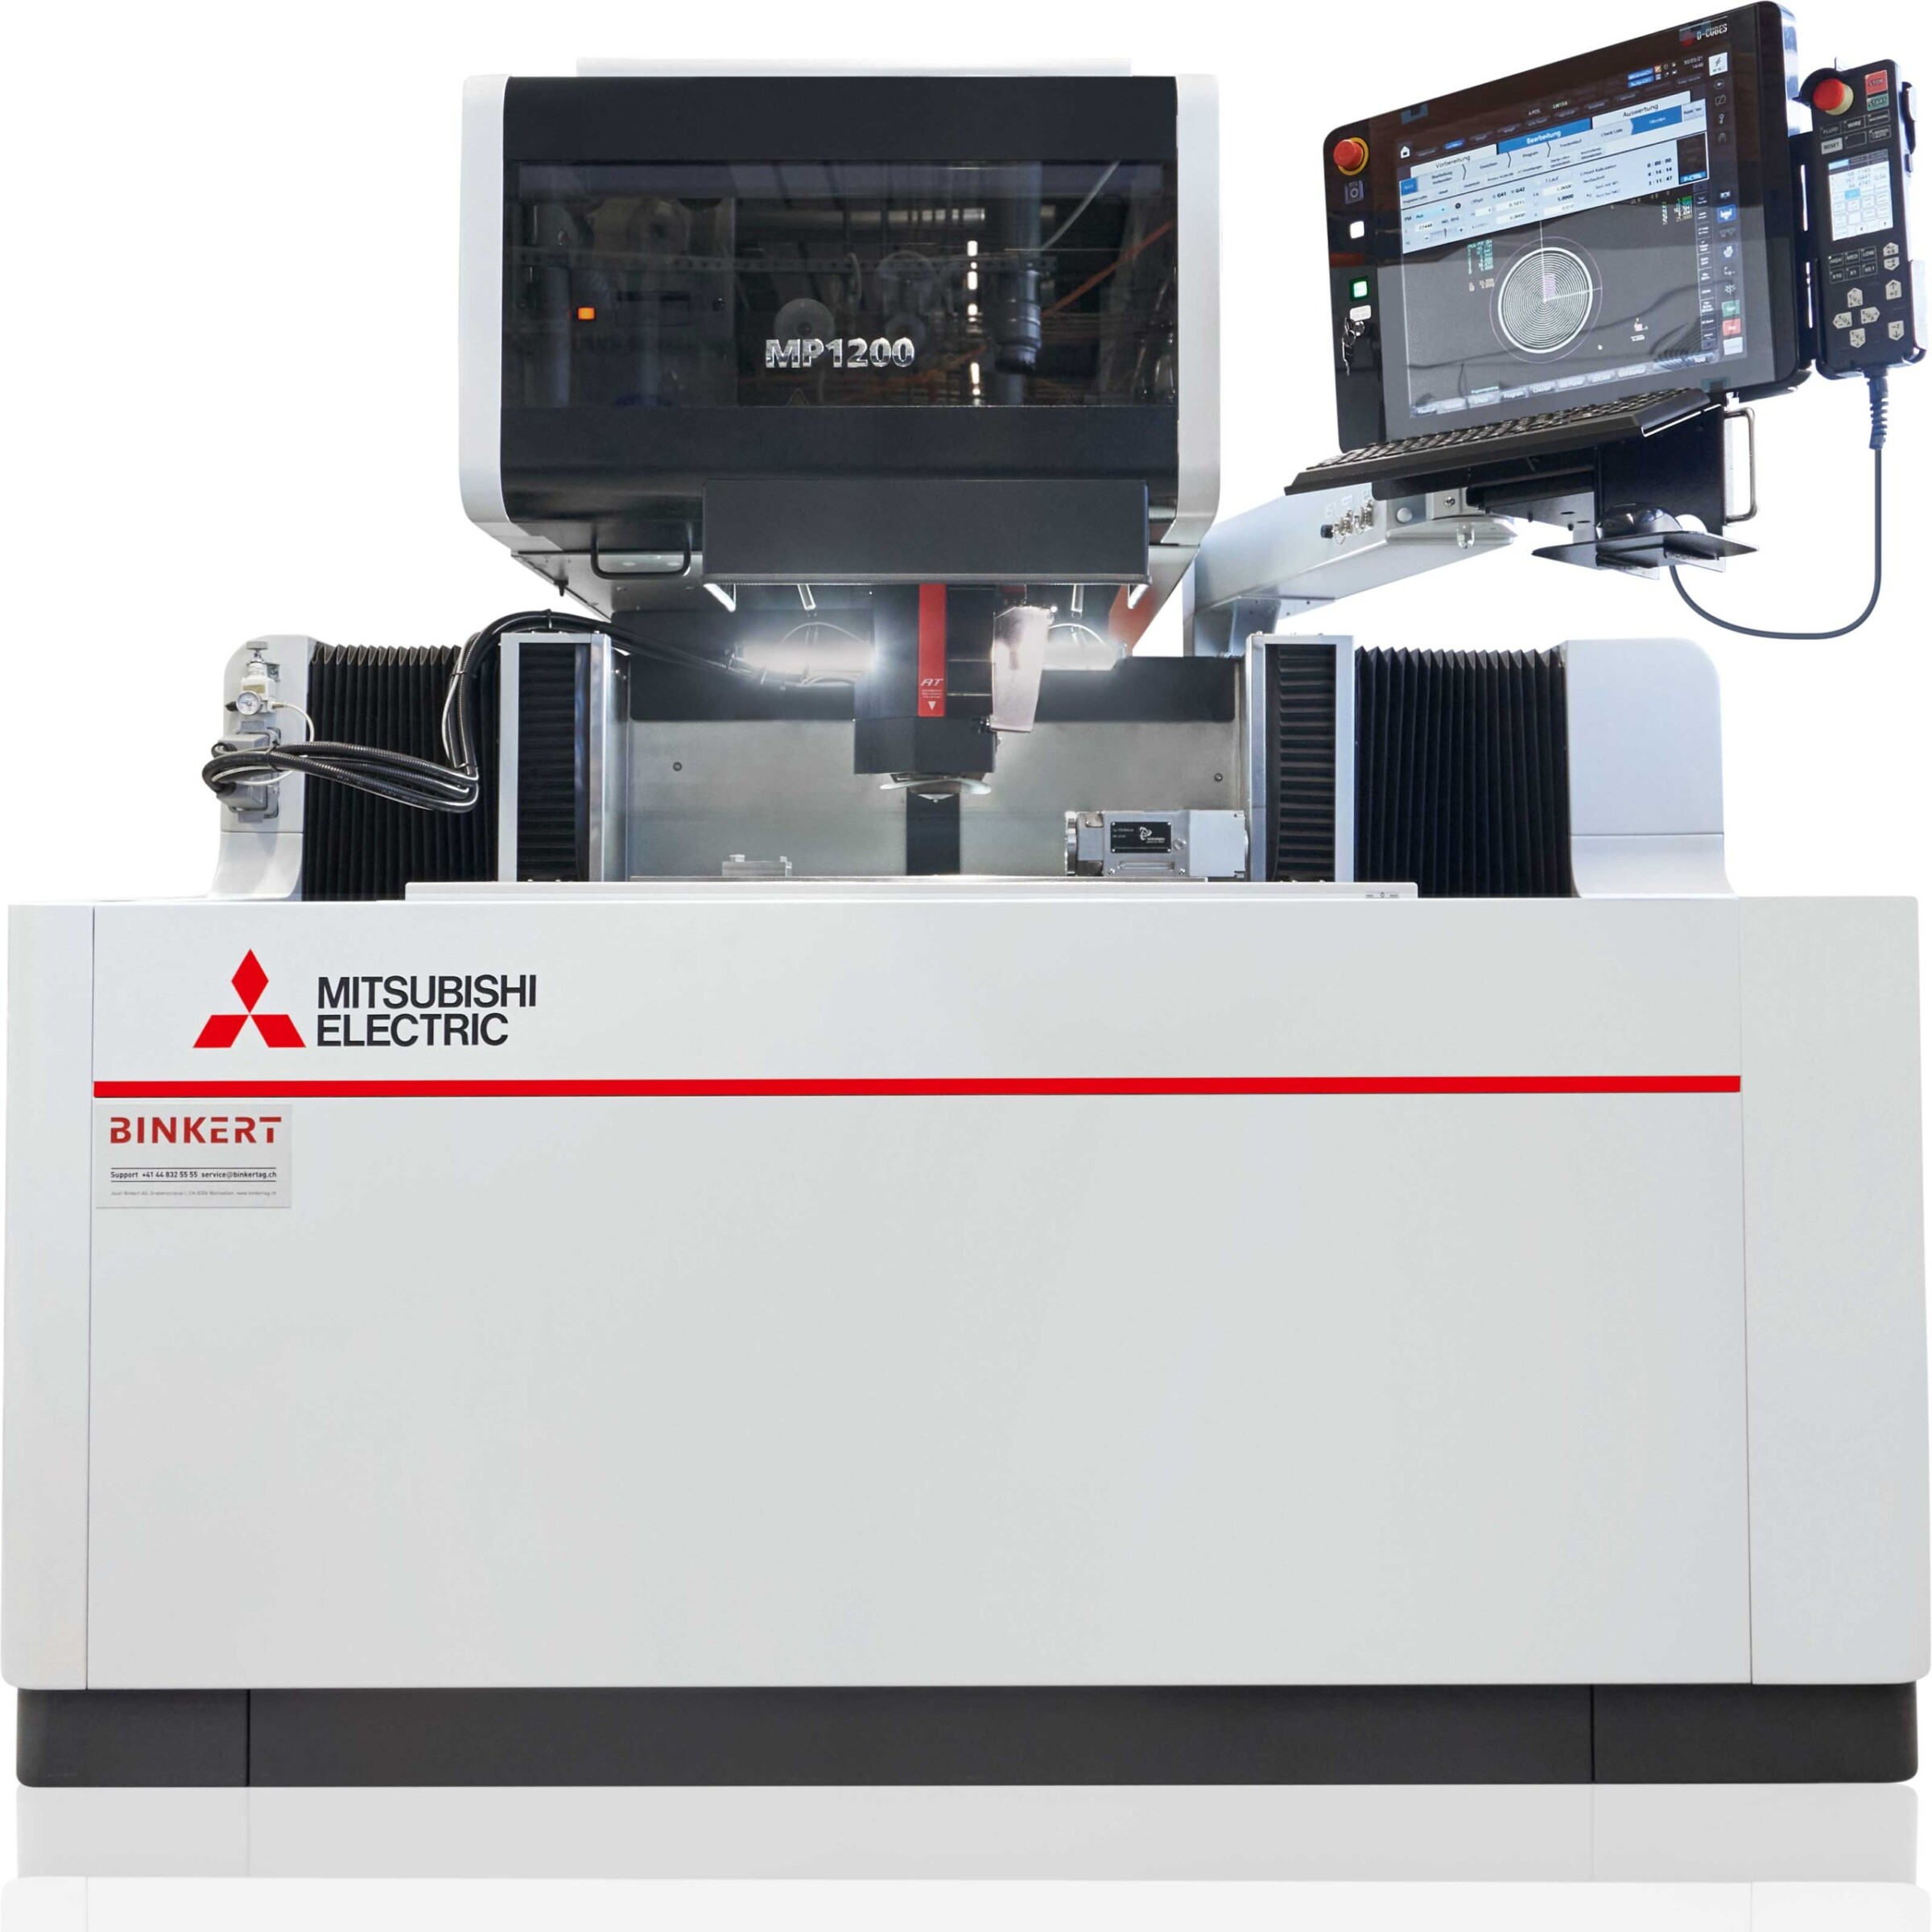 The Mitsubishi Electric MP1200 Connect wire-cut EDM system uses deionised water as the dielectric.